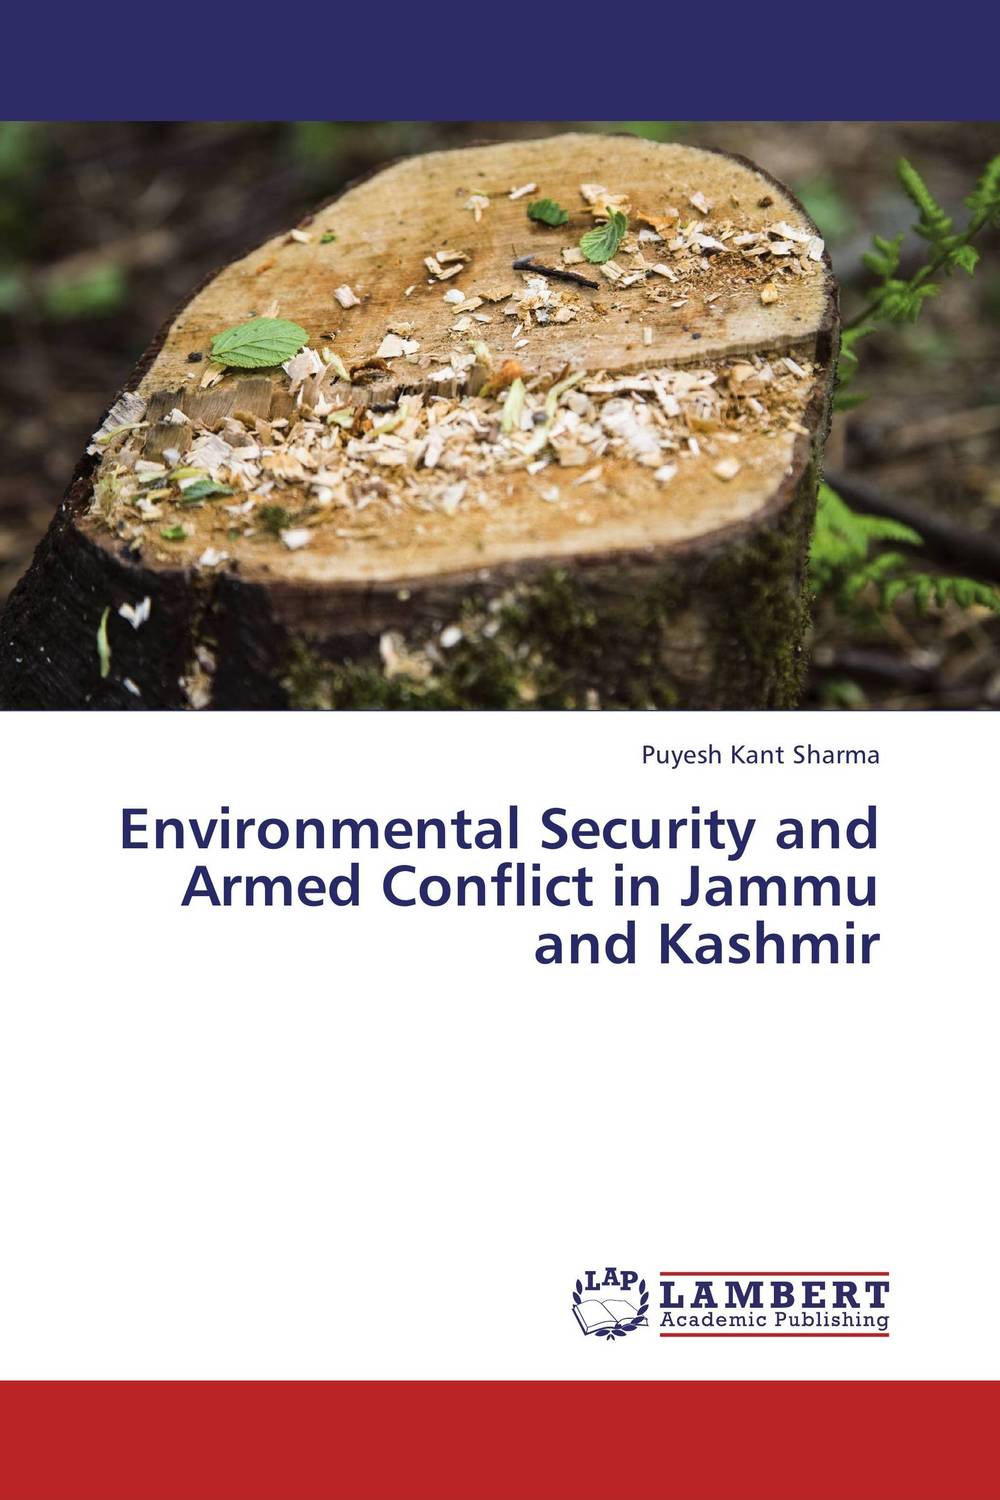 Environmental Security and Armed Conflict in Jammu and Kashmir